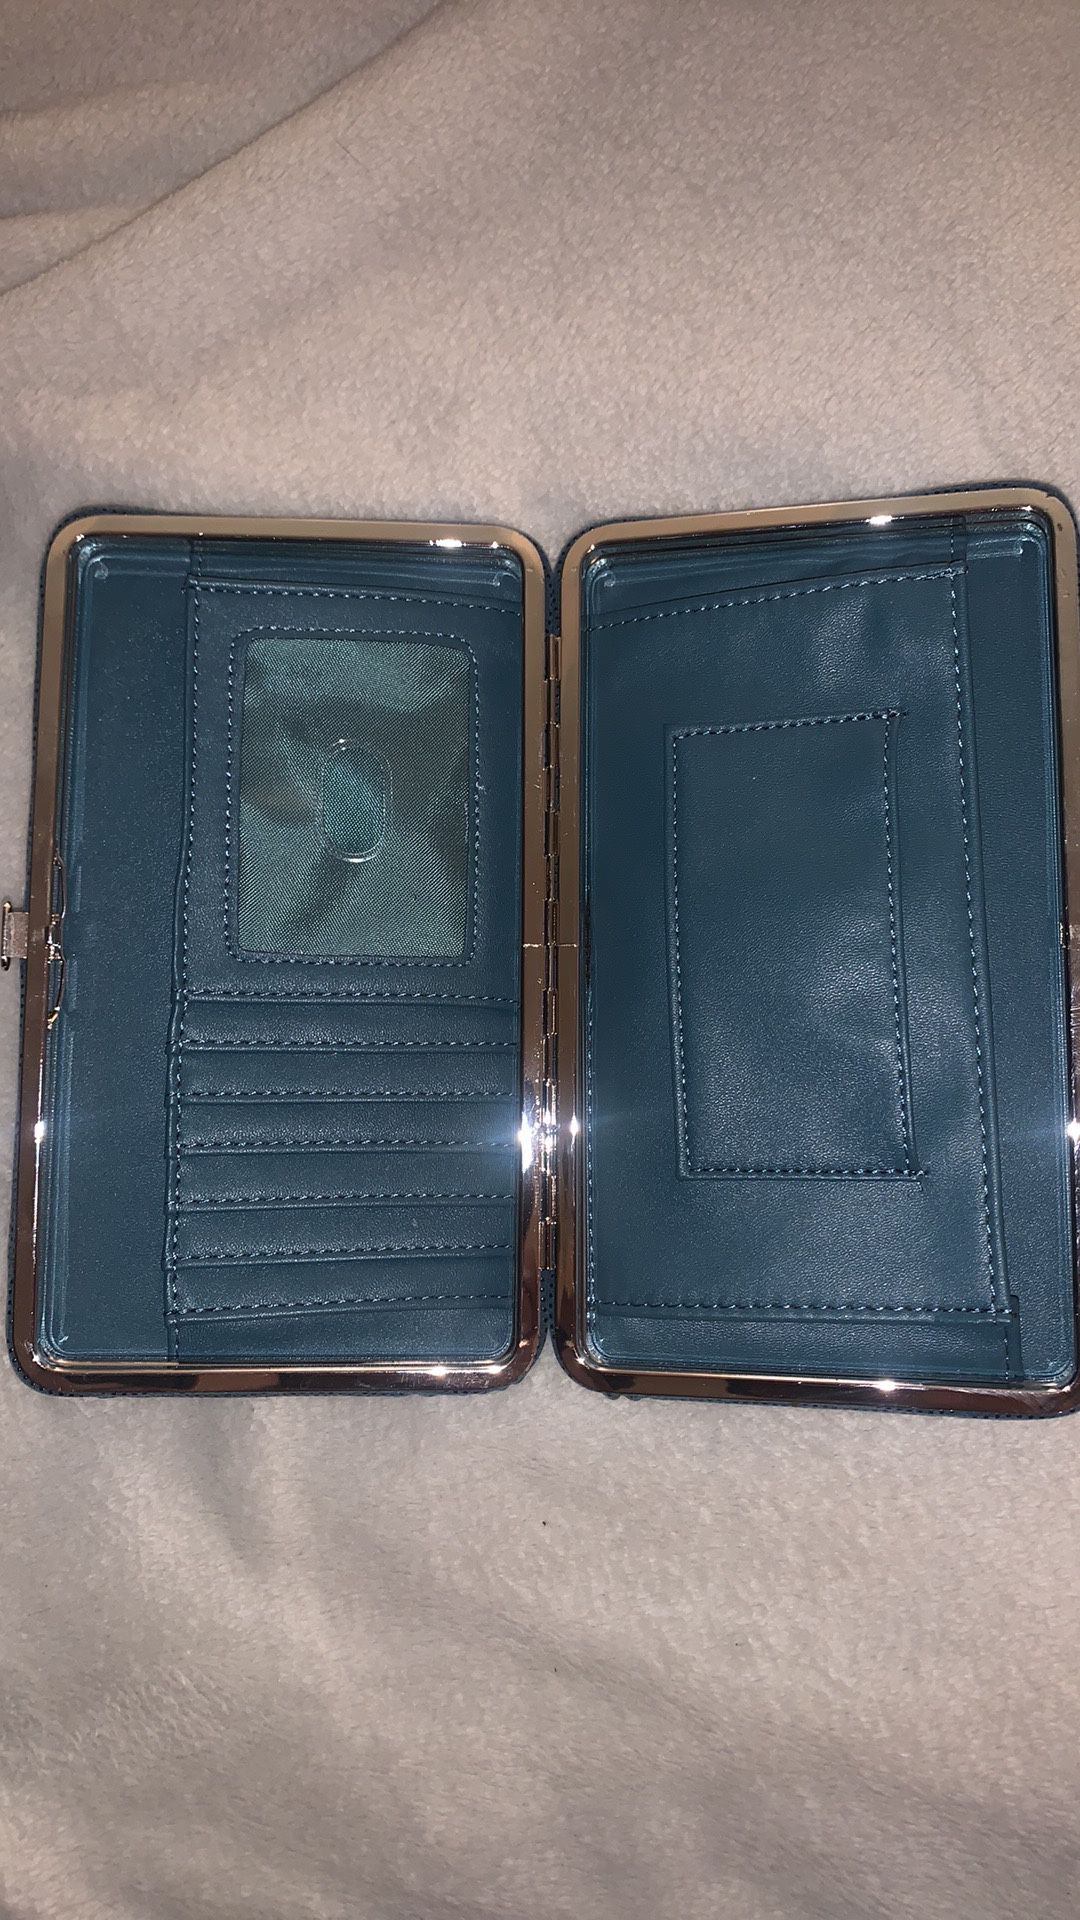 Wallet Never Used Turquoise Color 